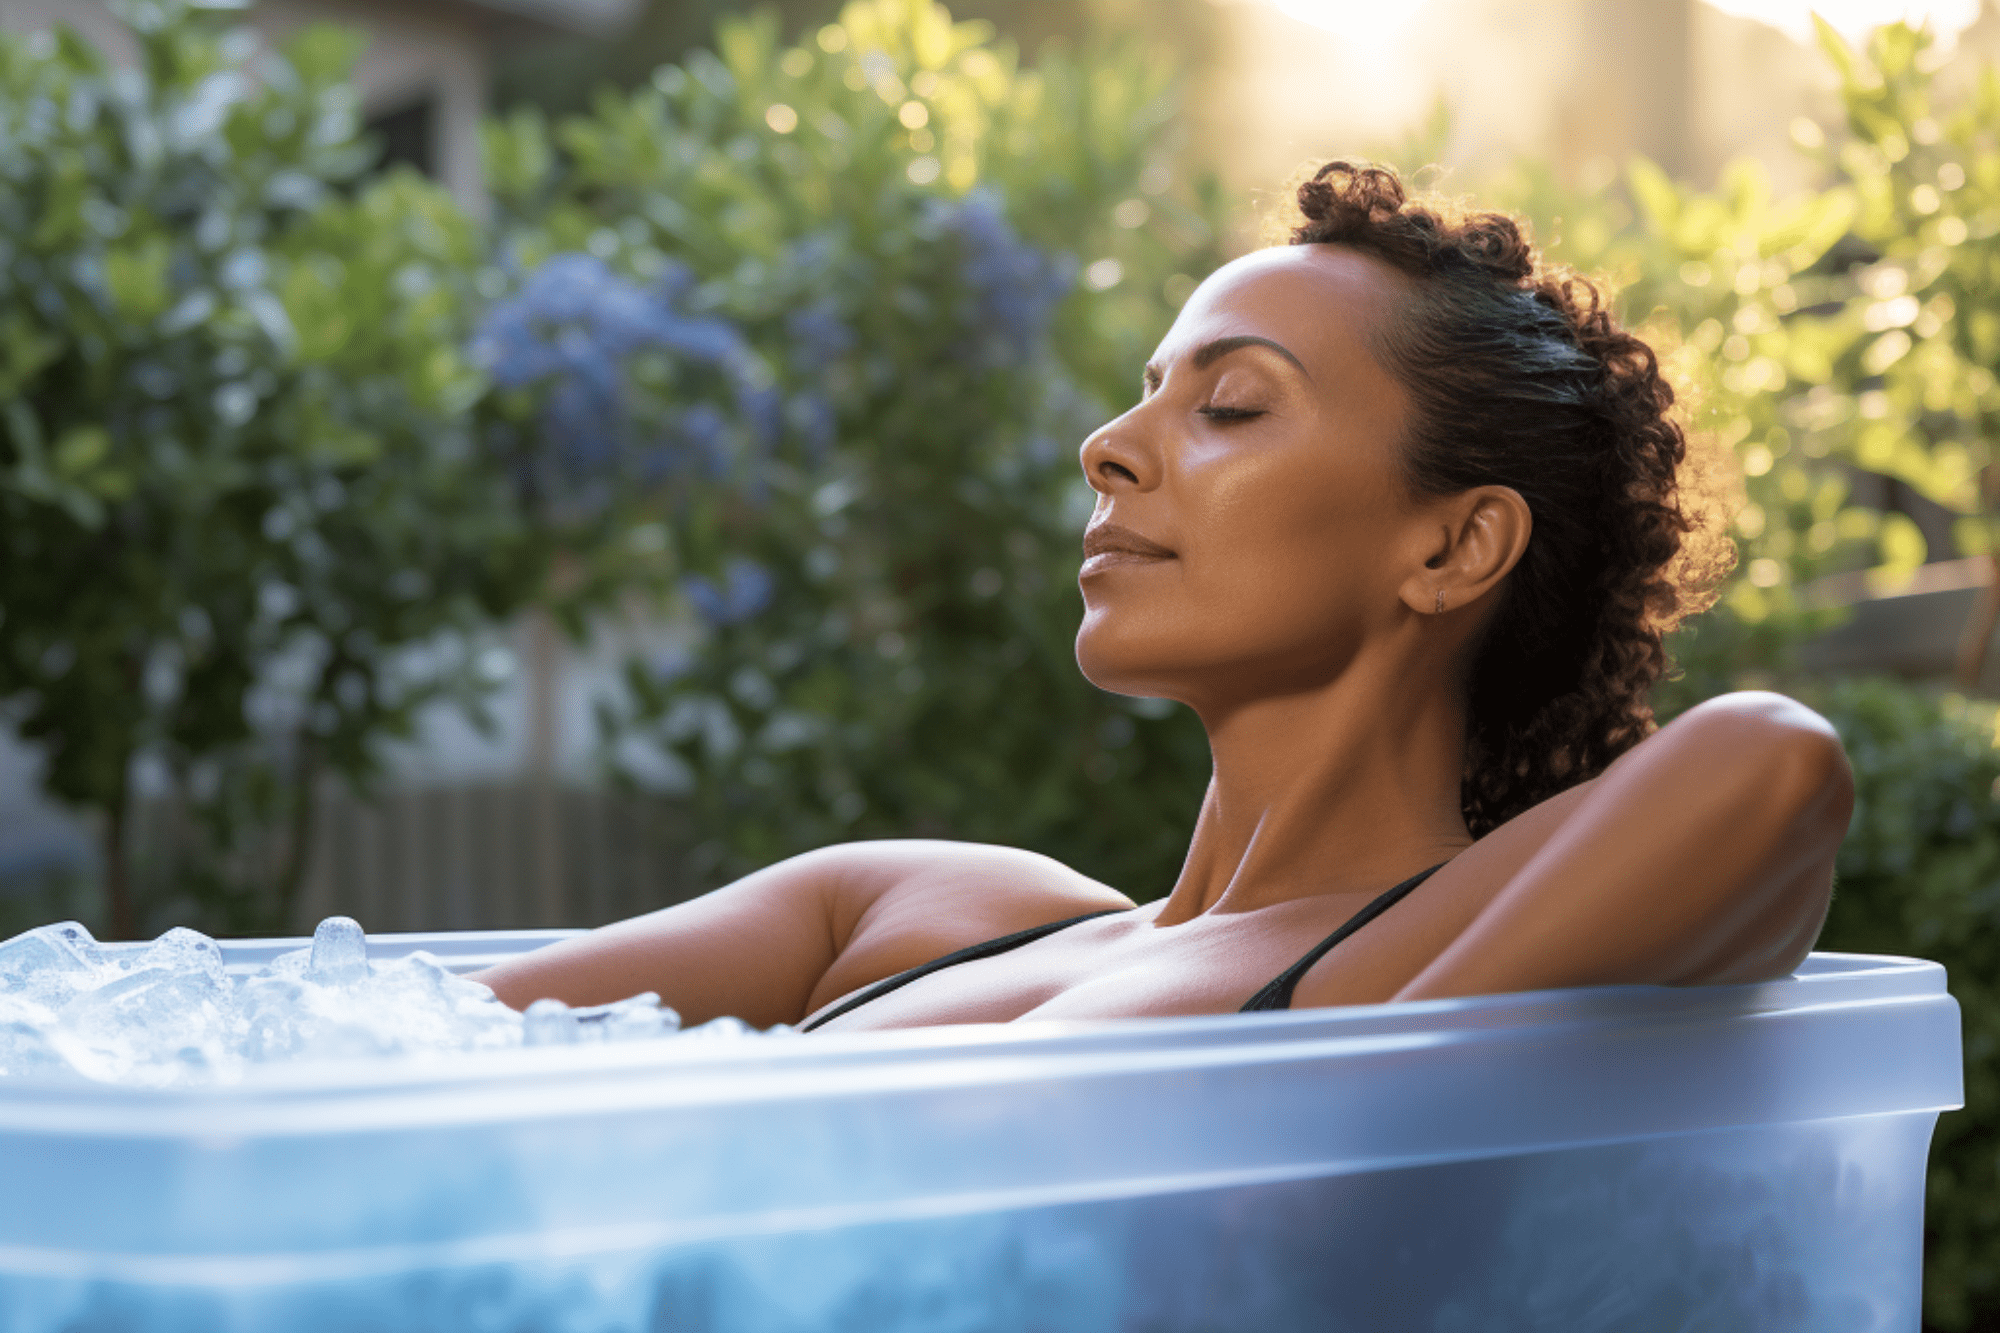 Ice Bath Benefits: How to Maximize Your Muscle Recovery